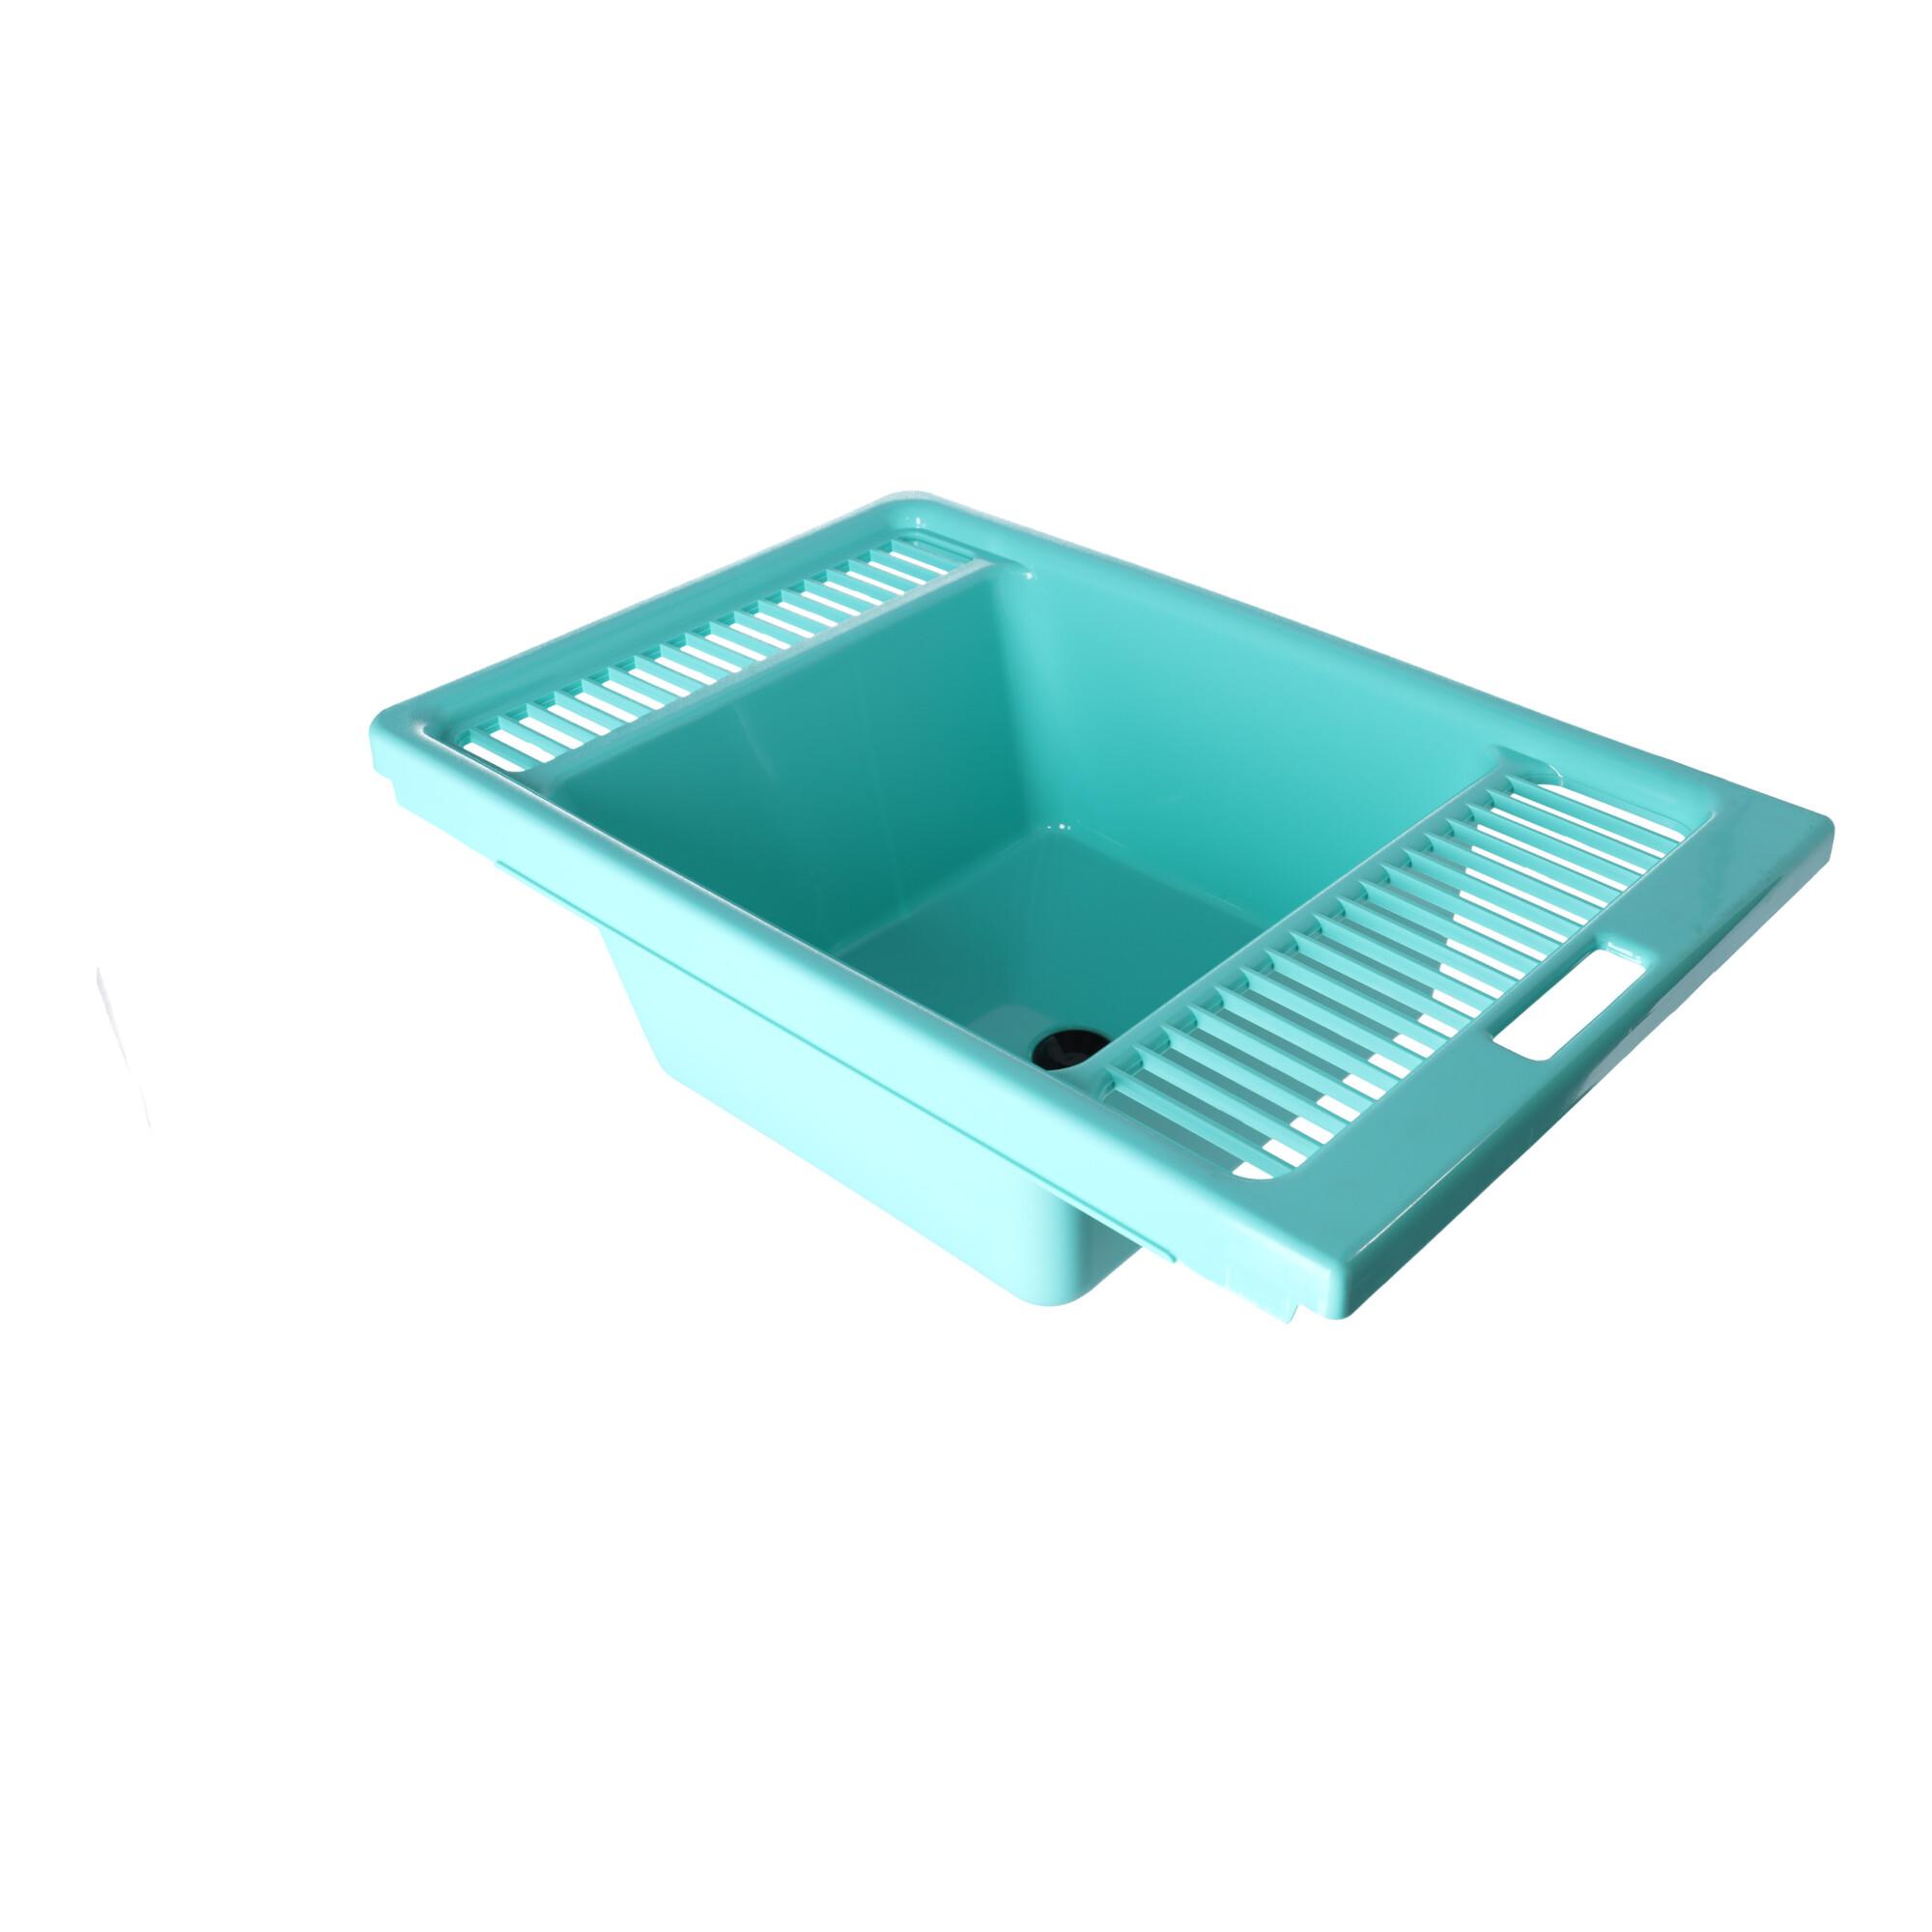 Bath bowl with stopper, POLISH PRODUCT - turquoise